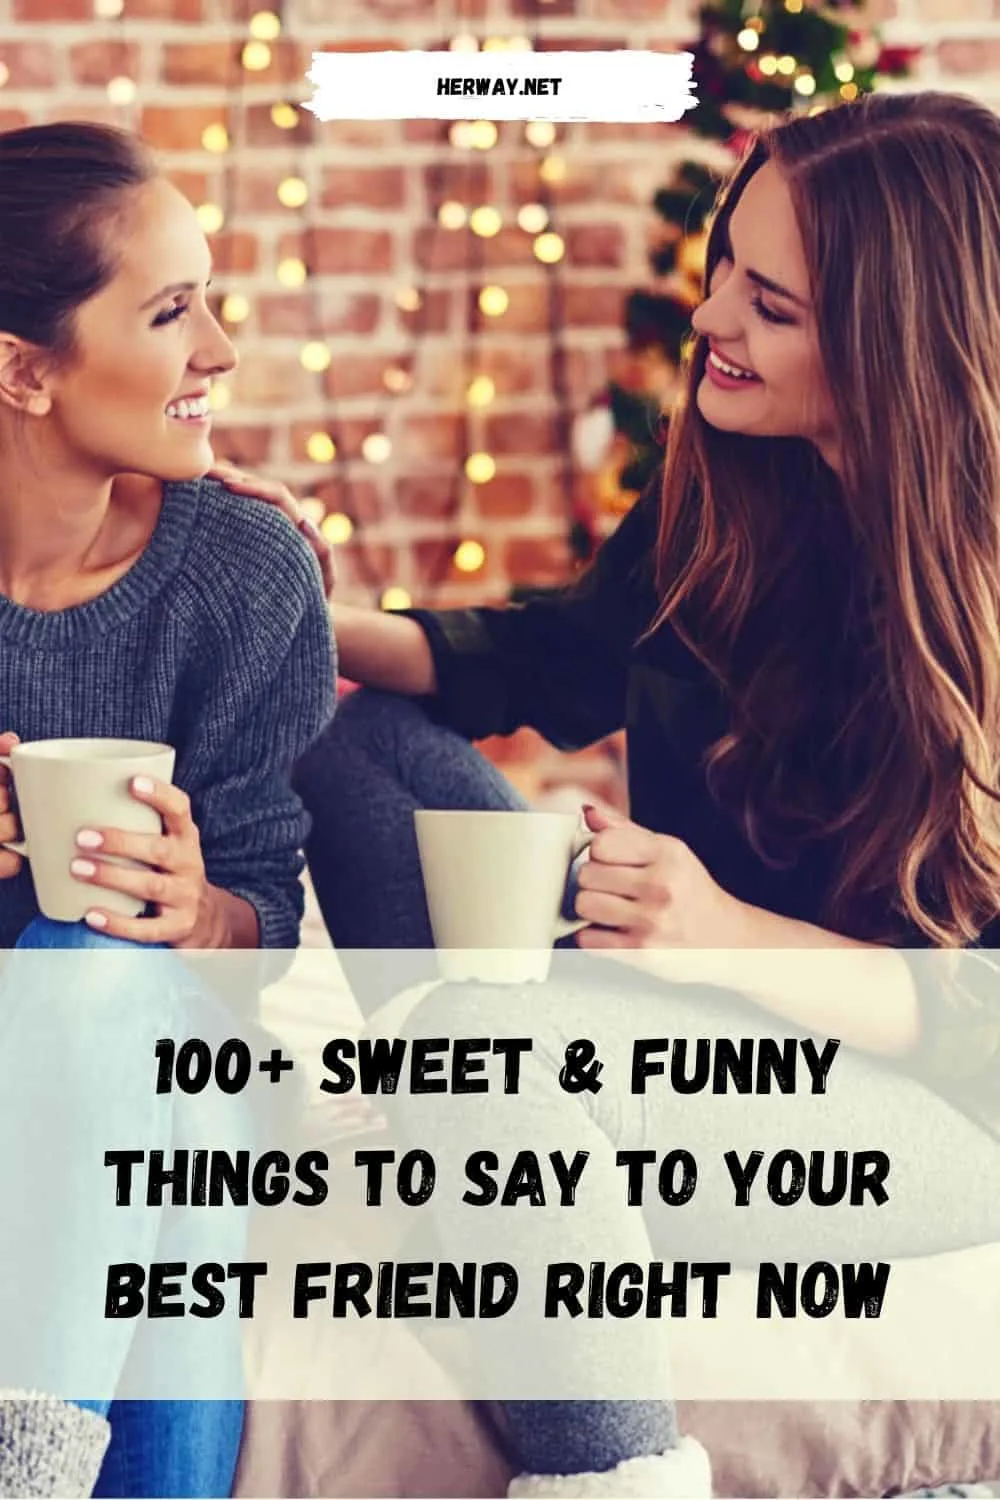 100+ Sweet & Funny Things To Say To Your Best Friend Right Now